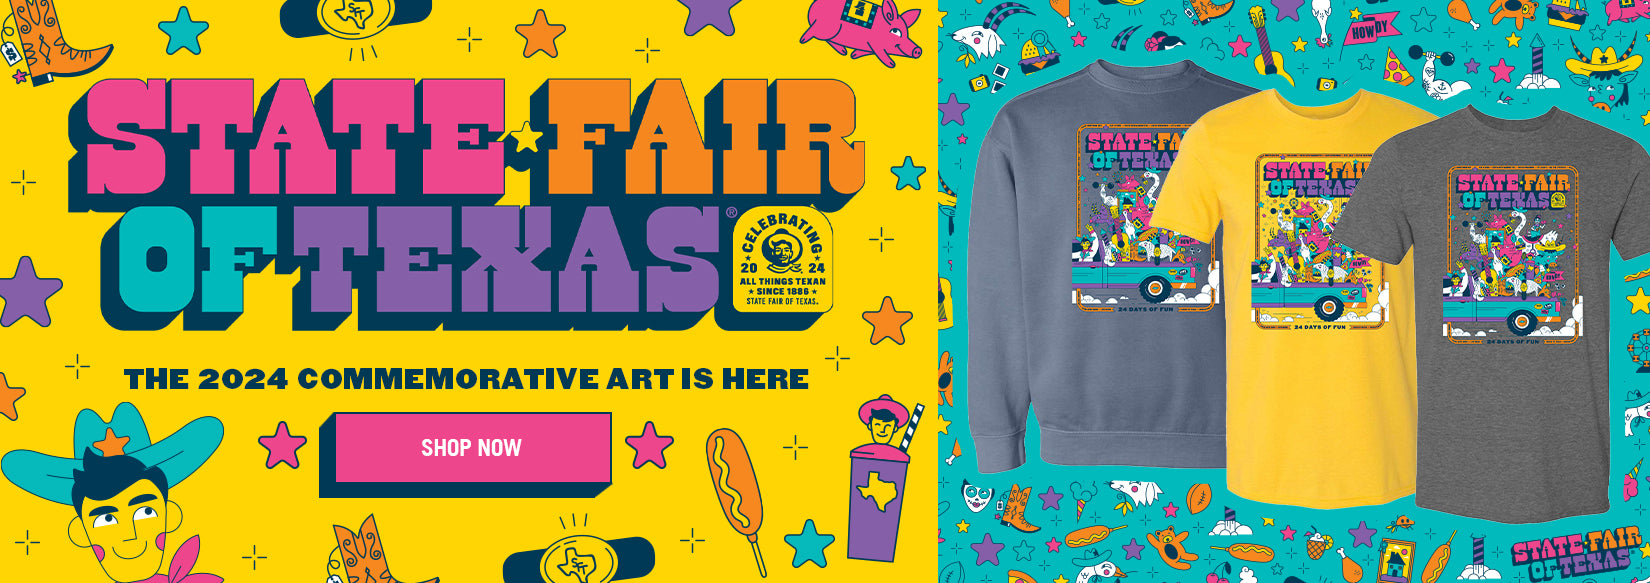 State Fair of Texas - The 2024 Commemorative Art is Here - SHOP NOW